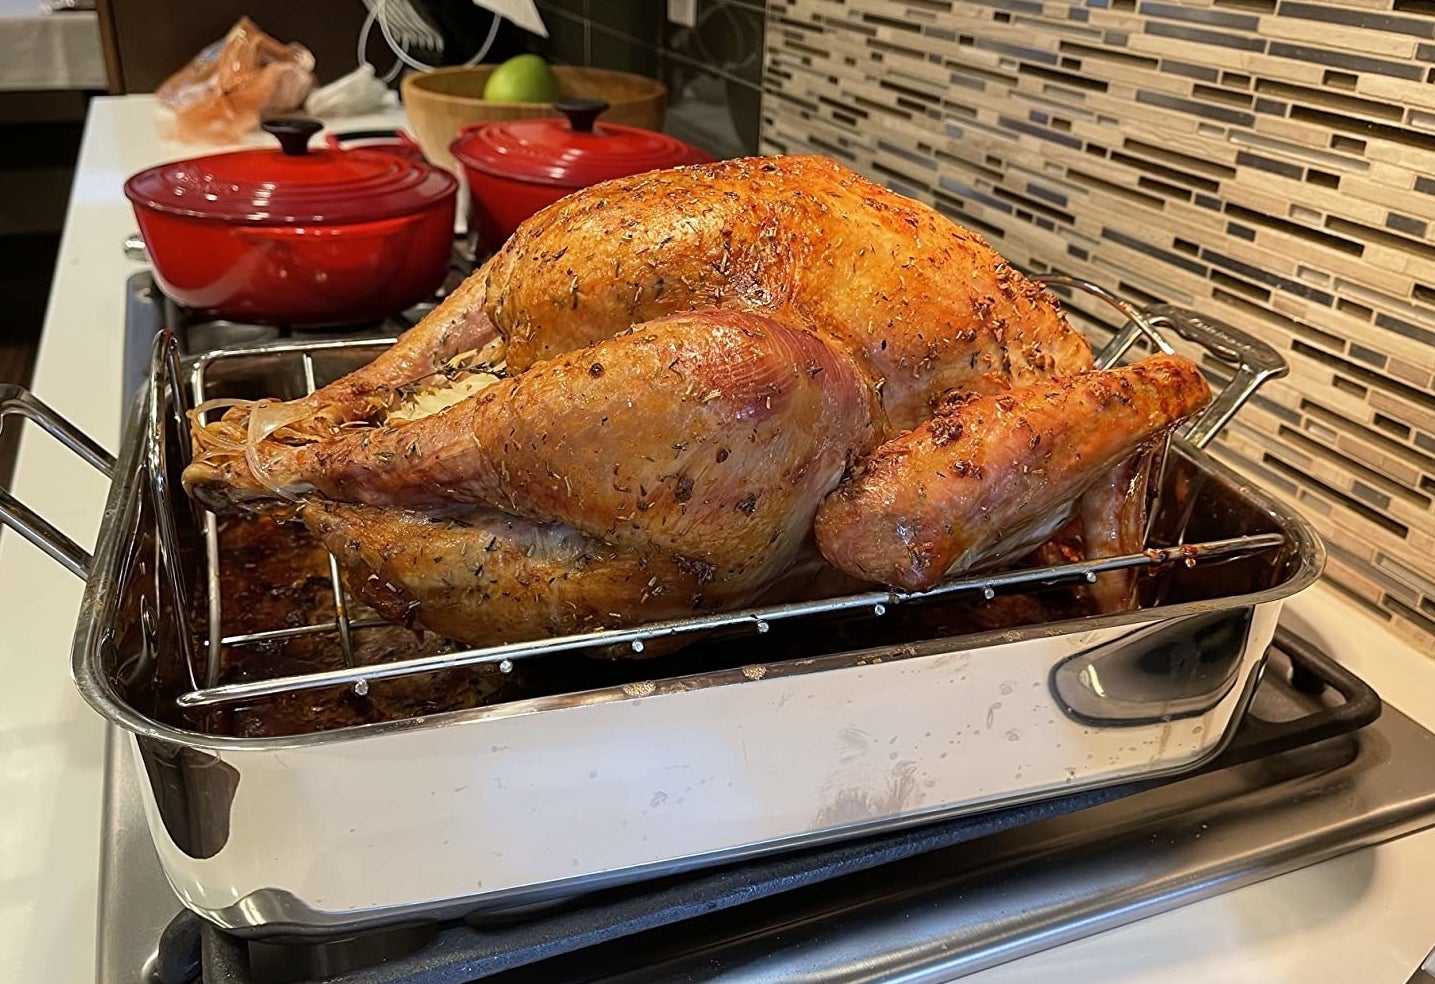 Reviewer photo of the roasting pan holding a turkey